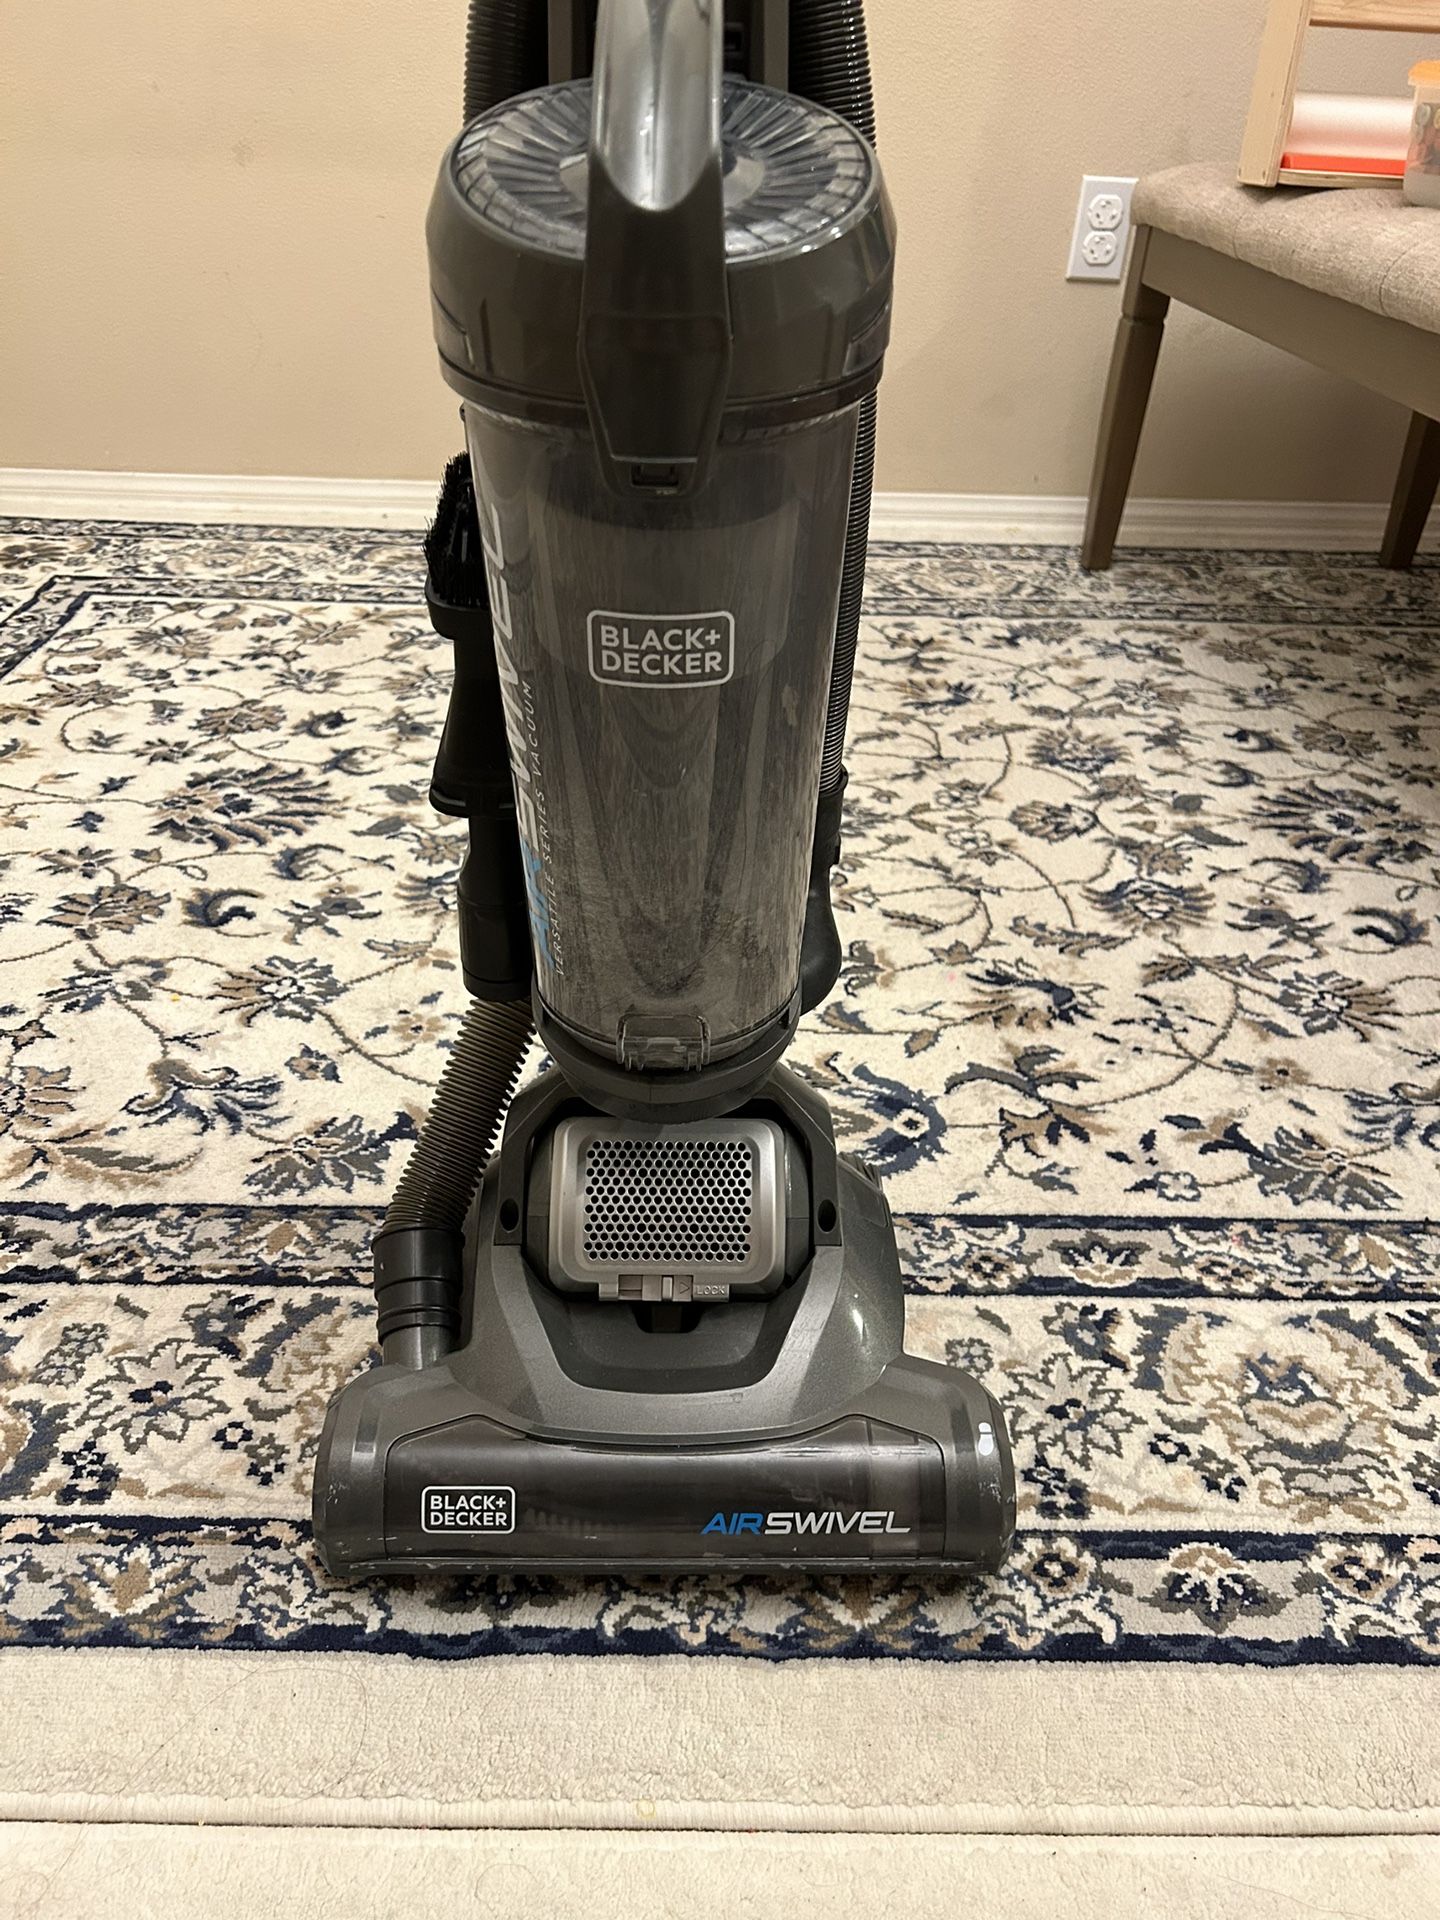 Black and Decker AIRSWIVEL Vacuum BDASV104 for Sale in Upland, CA